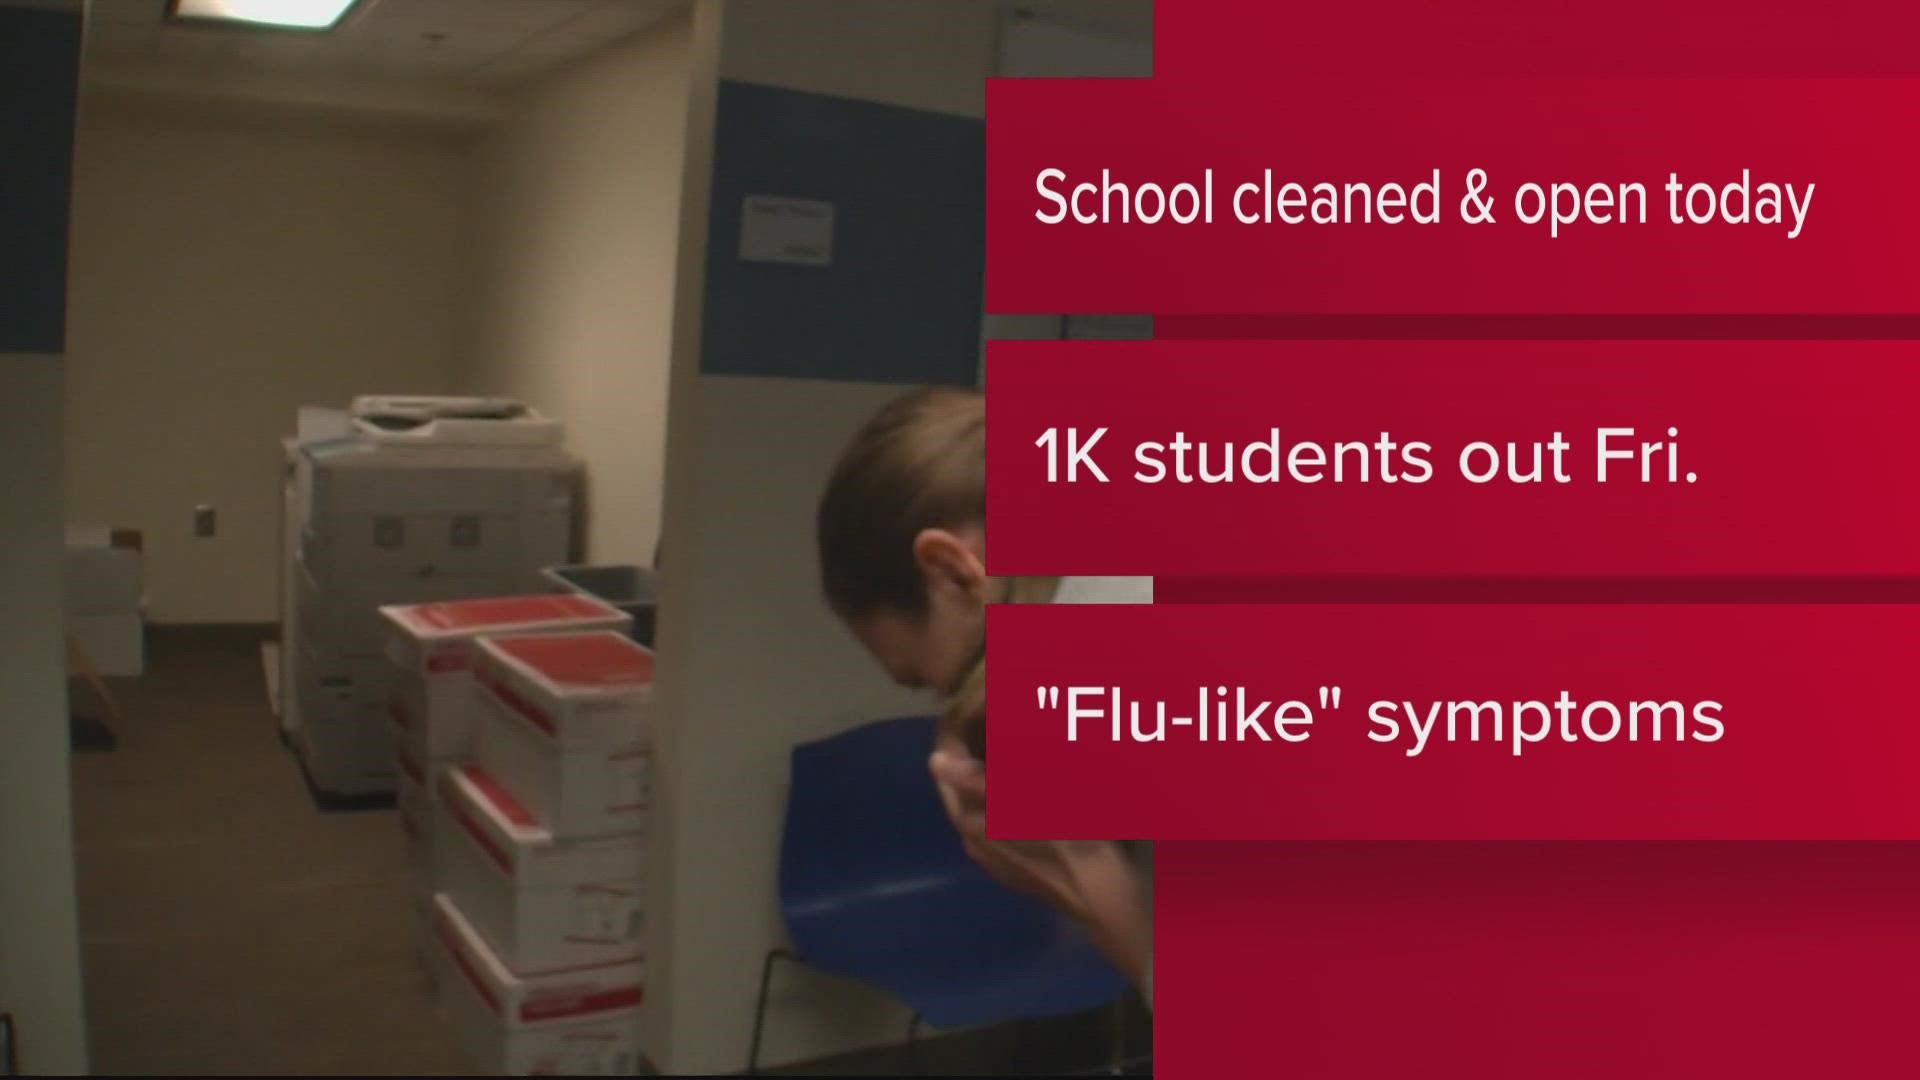 The school has been cleaned and disinfected after about 1,000 students were absent Friday with flu-like symptoms.